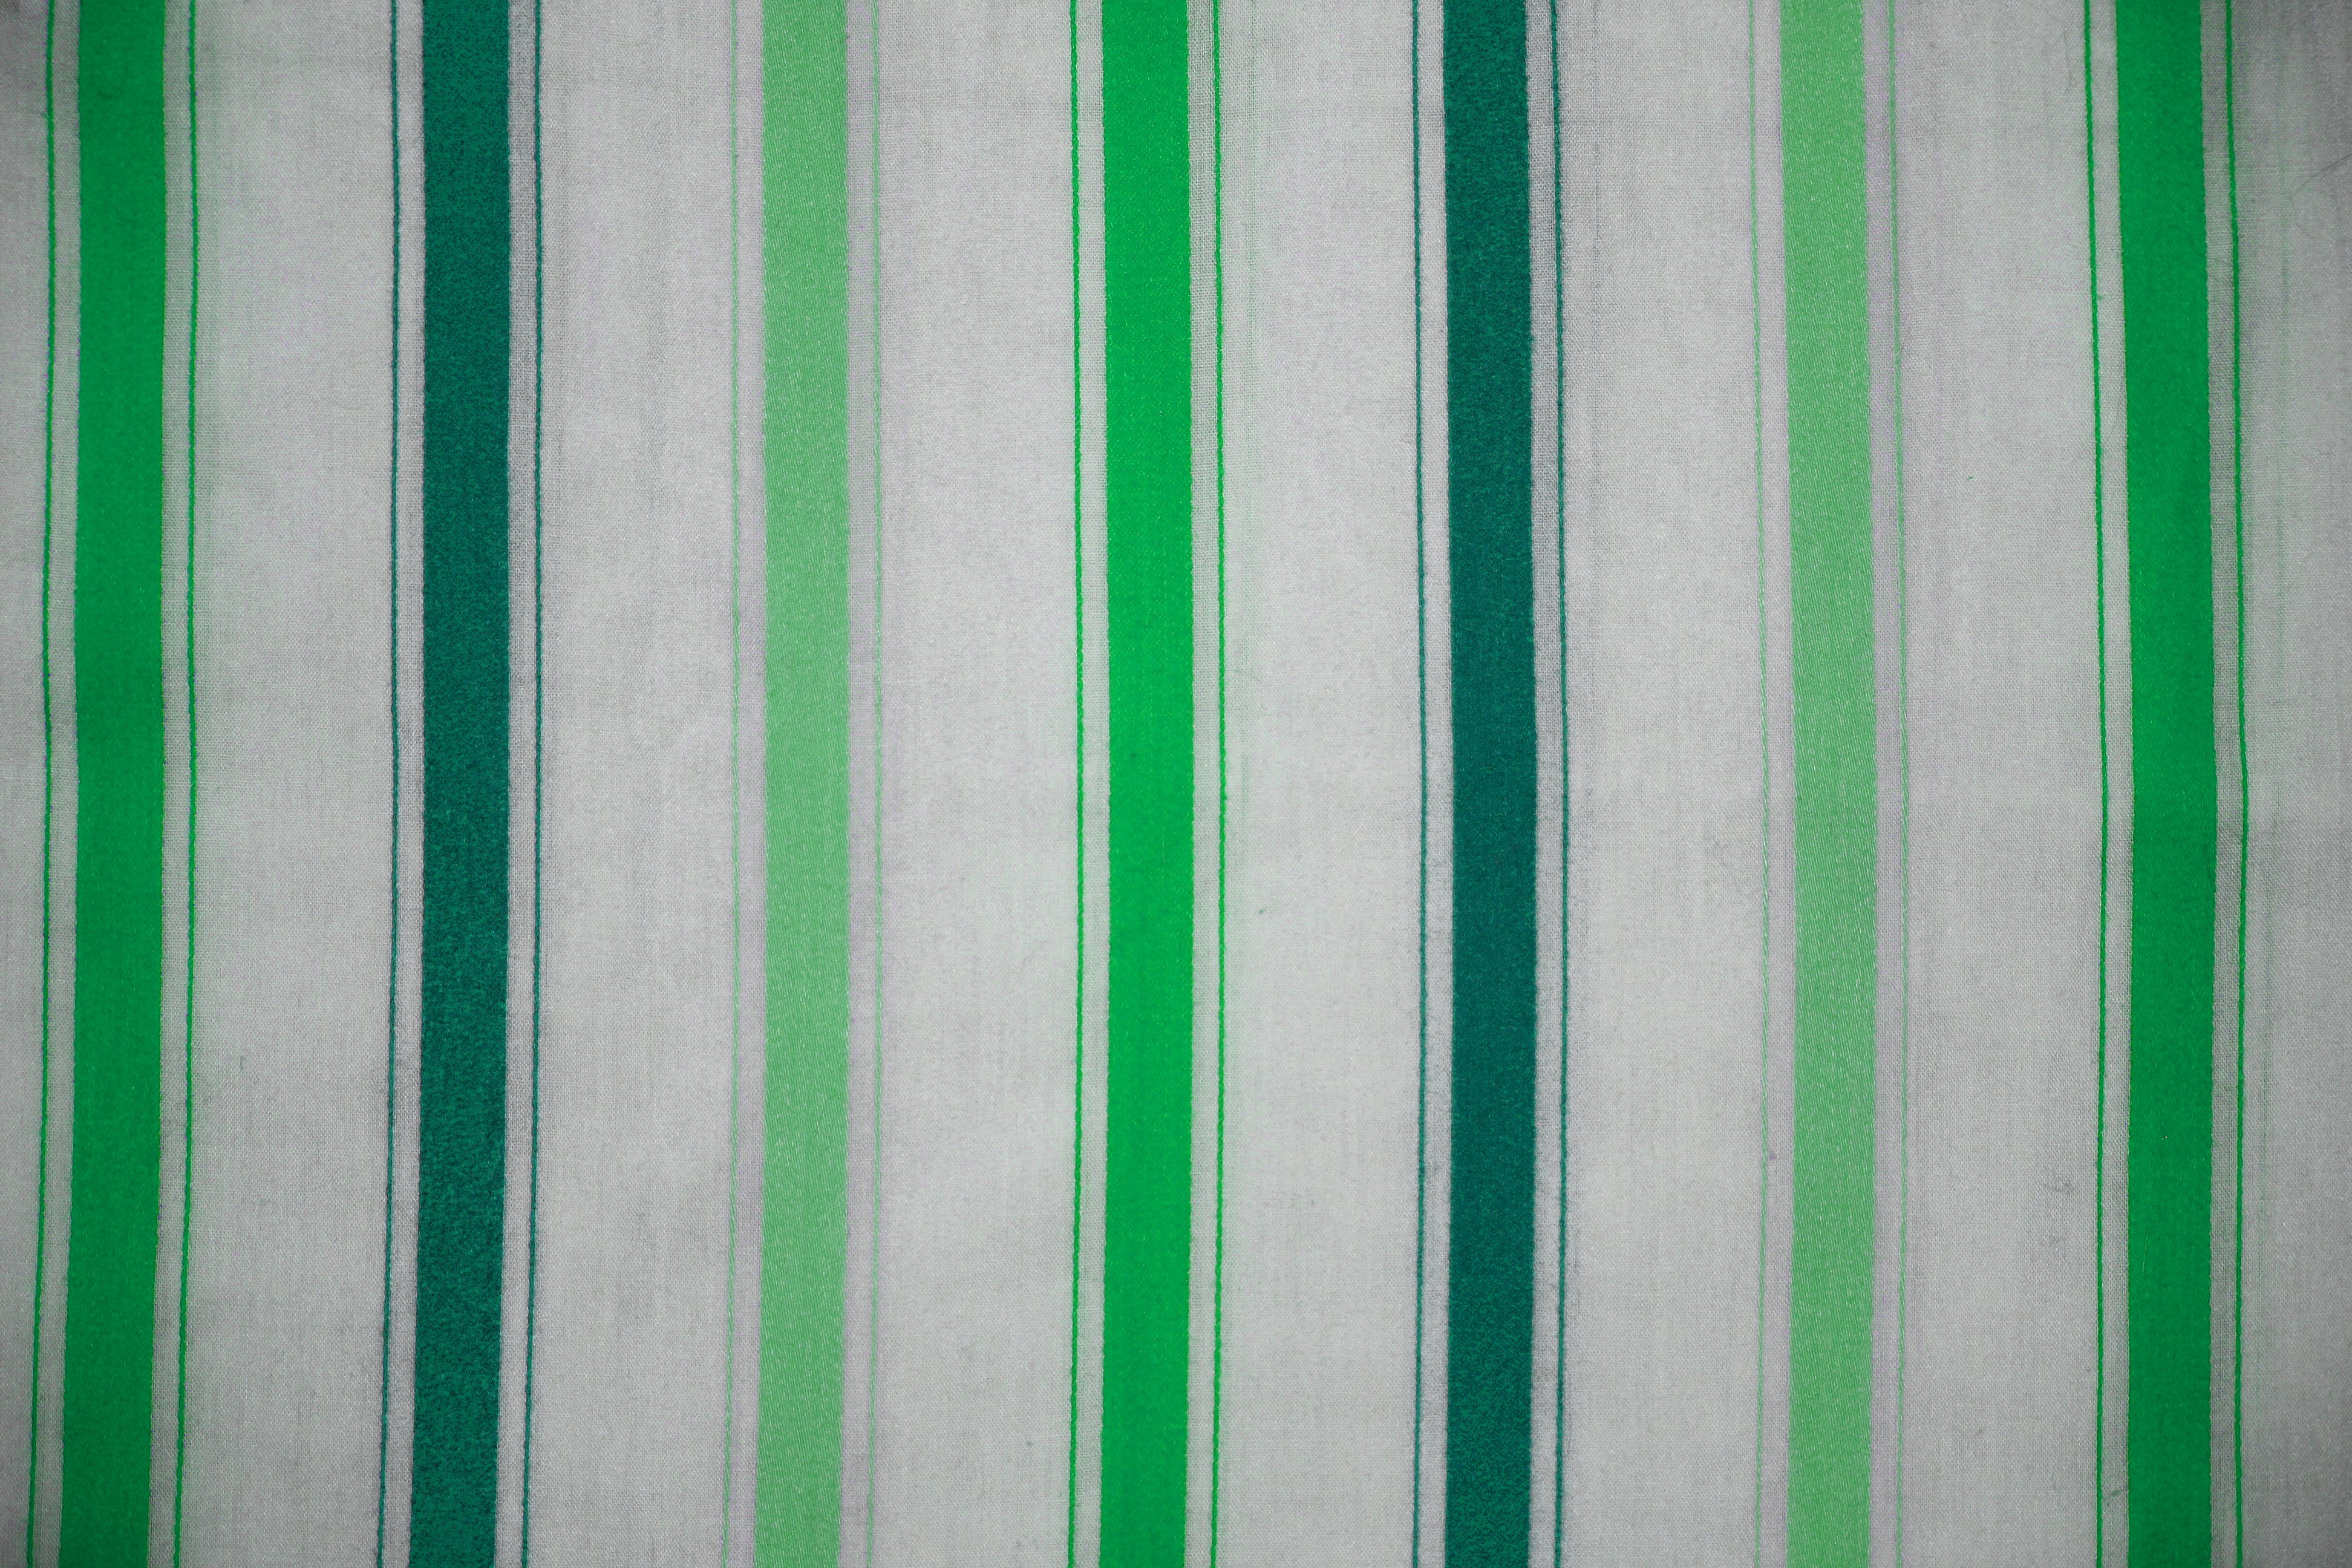 Striped Fabric Texture Green on White Picture | Free Photograph ...